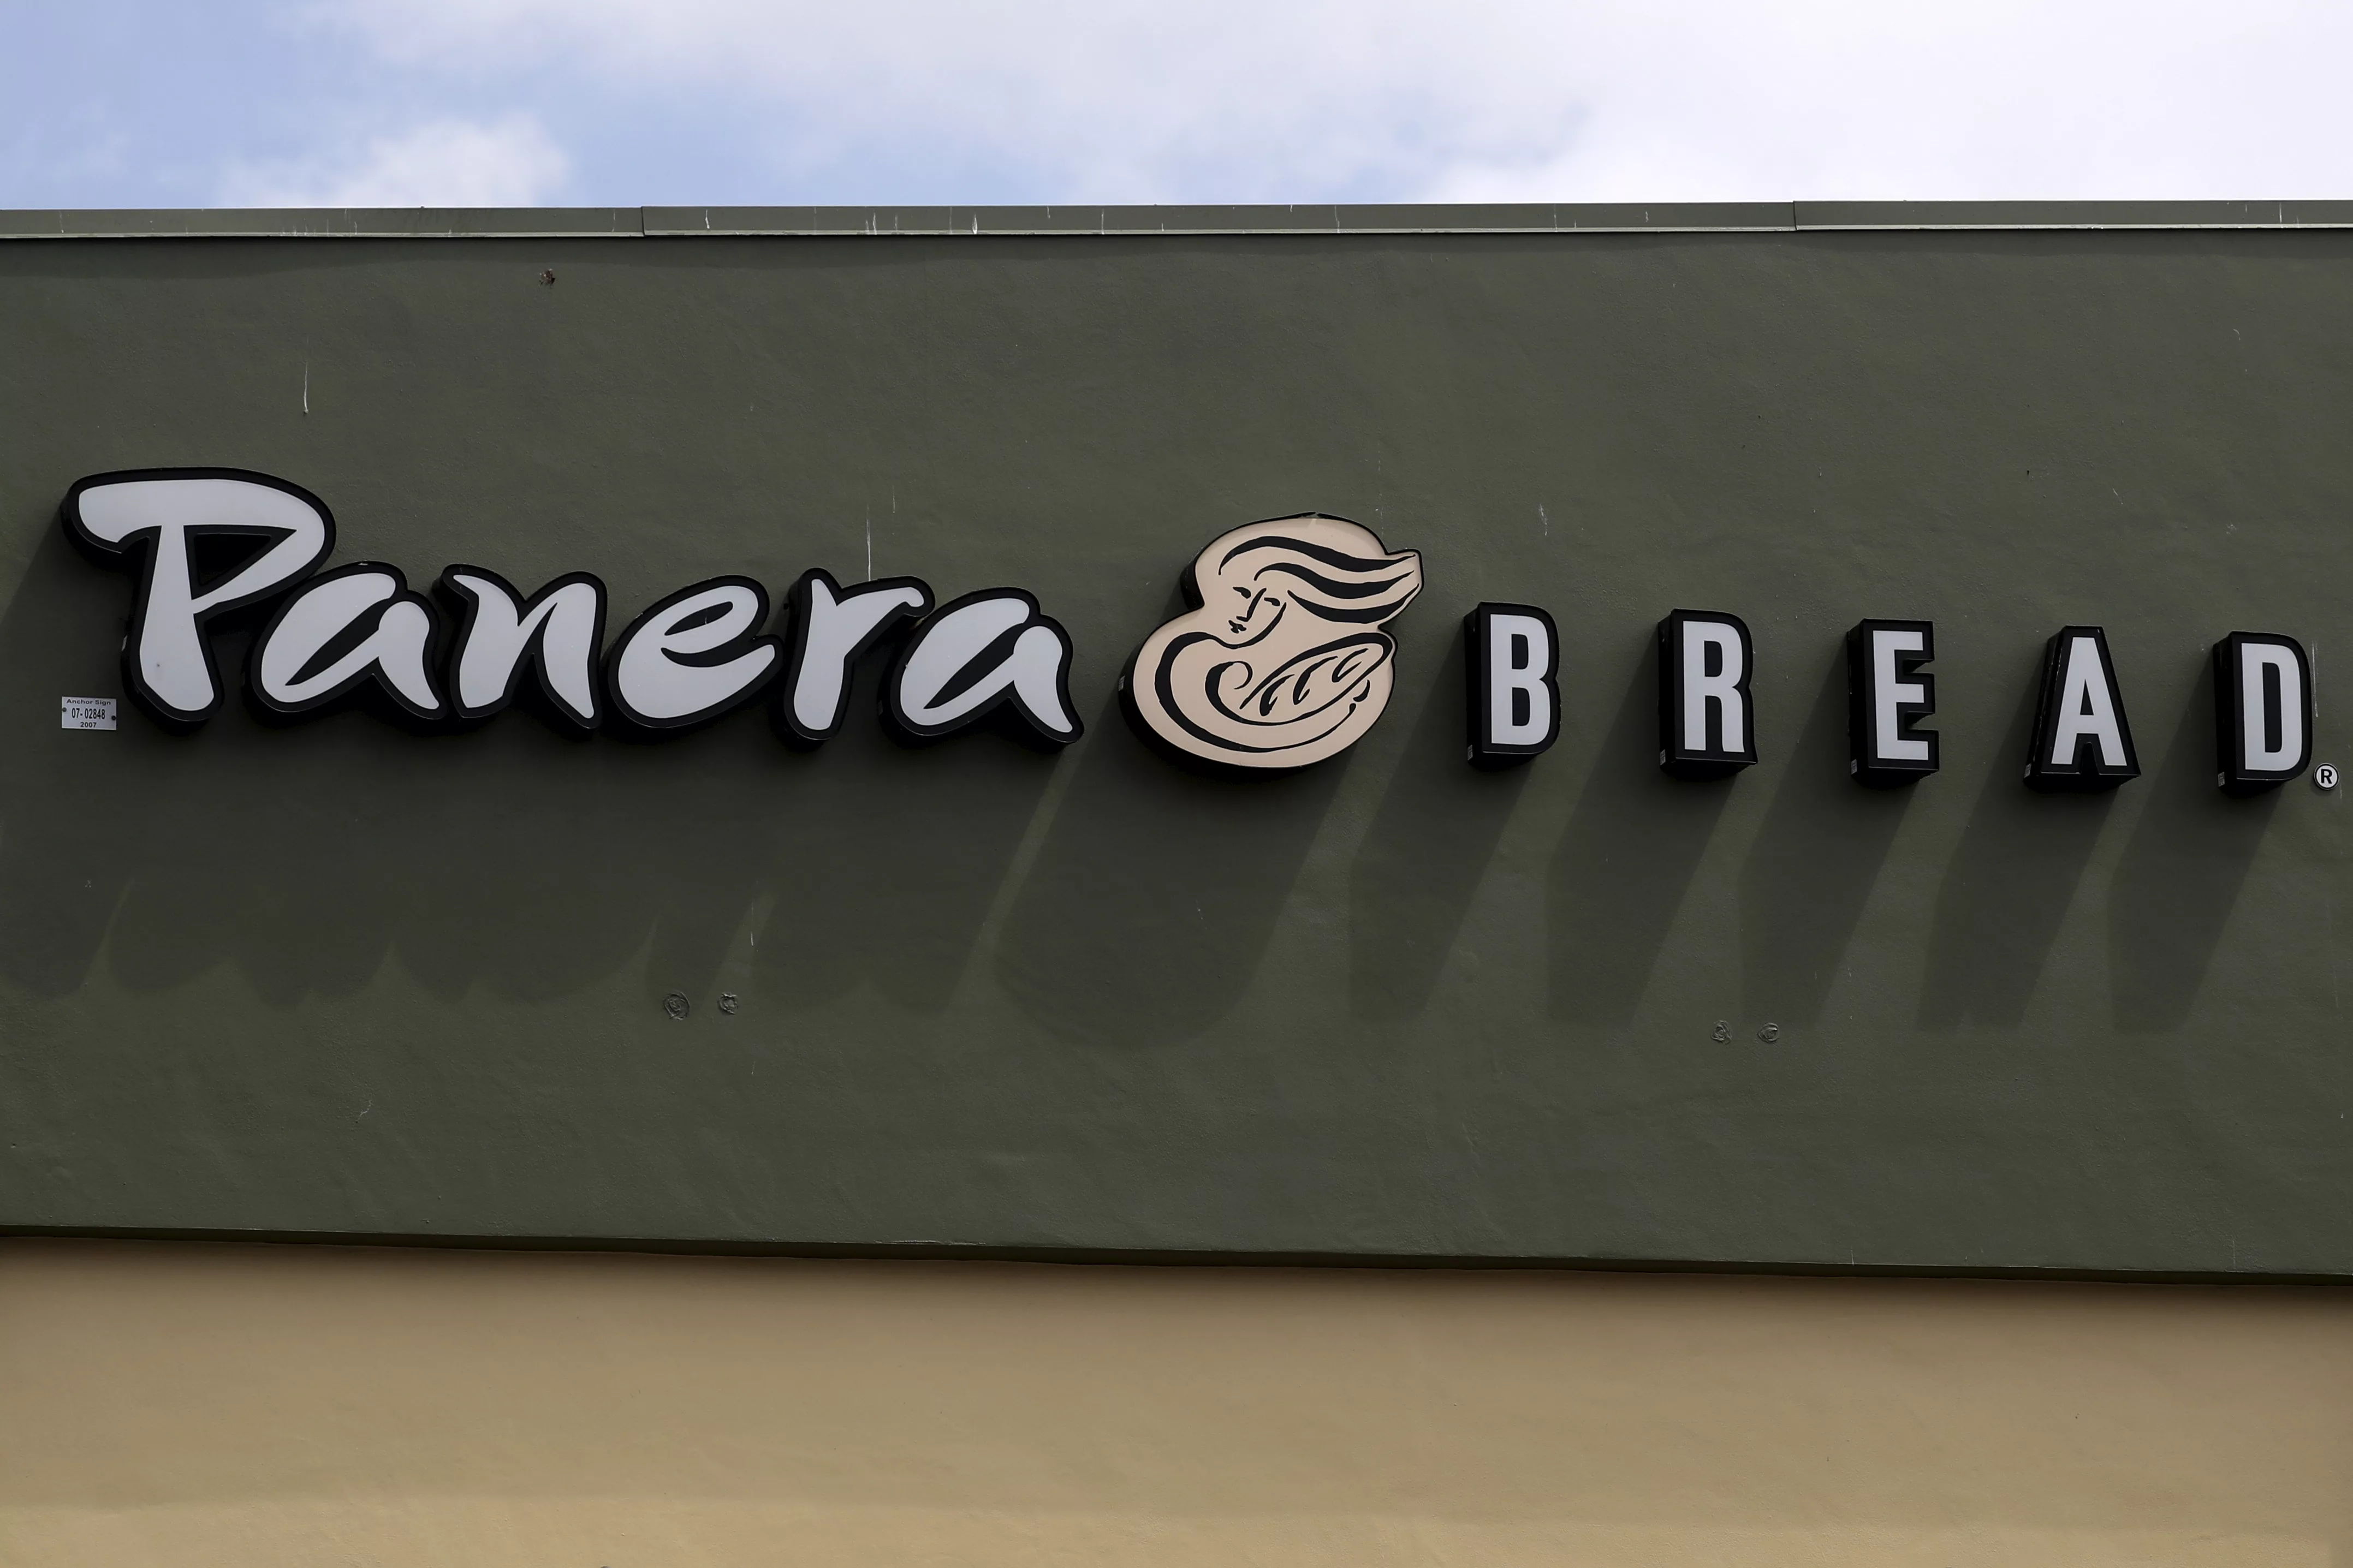 a-panera-restaurant-logo-is-pictured-on-a-building-in-north-miami-florida